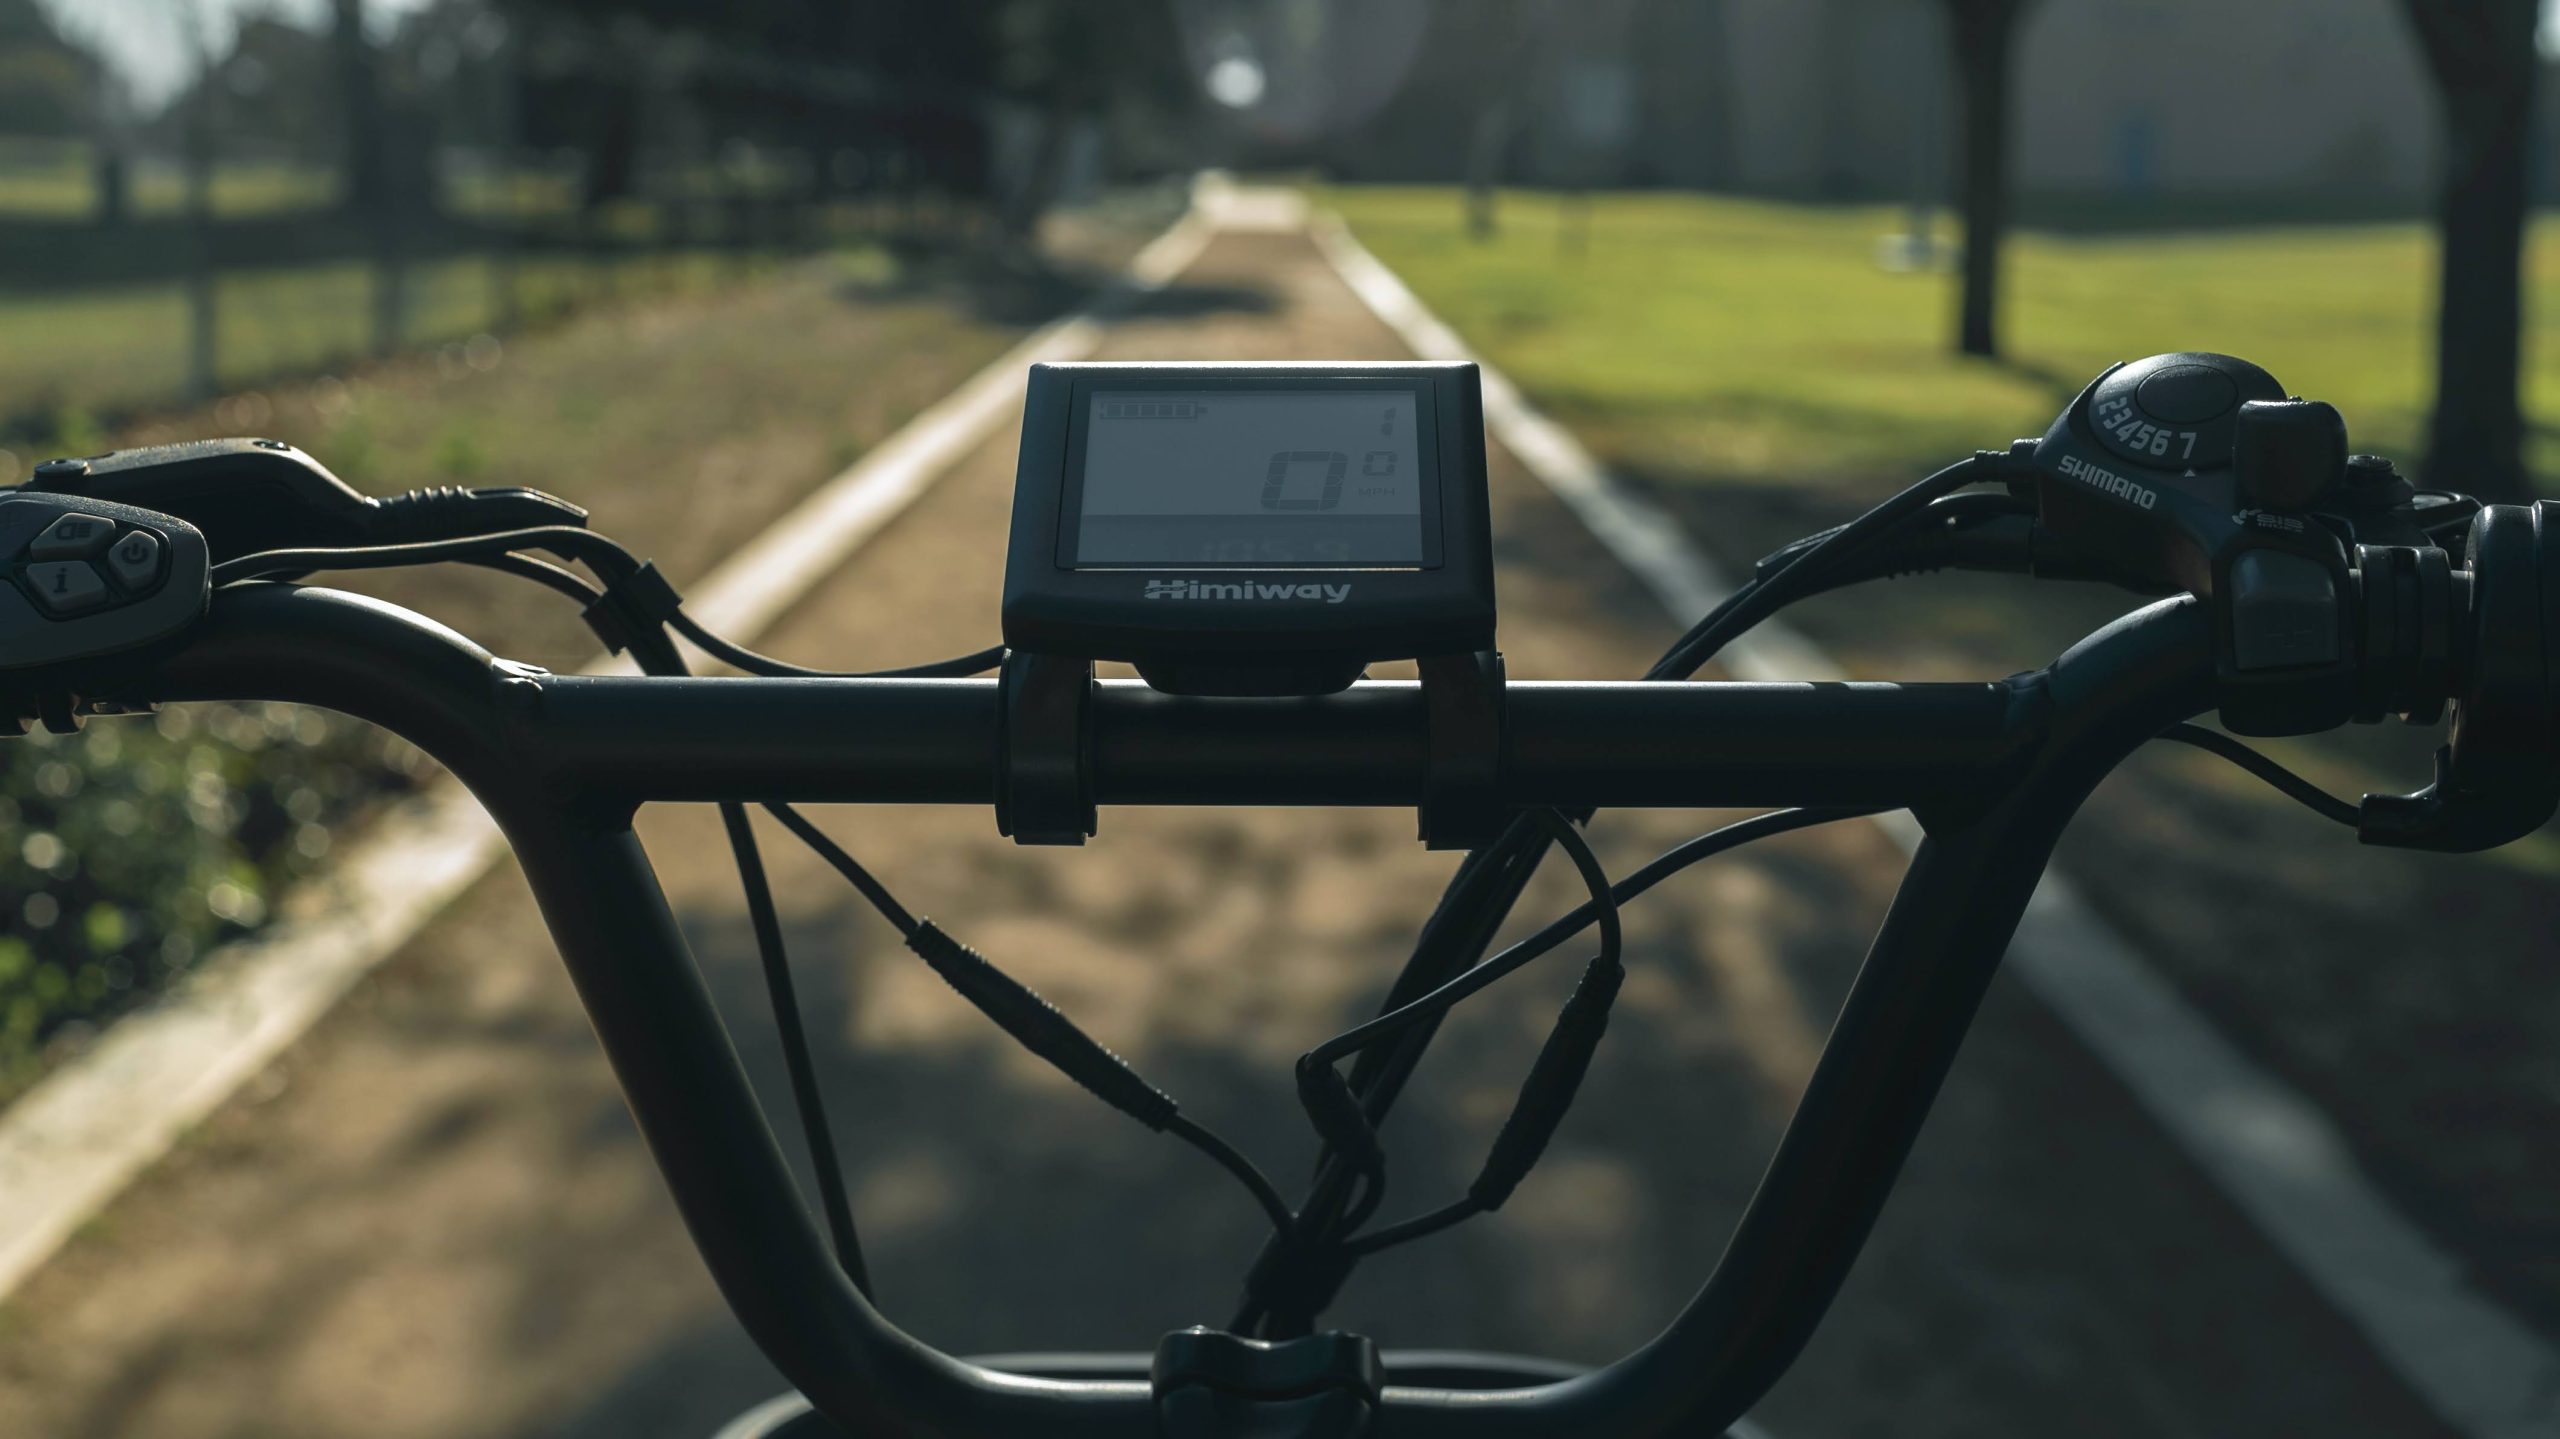 Close-up shot of Himiway eBike display and handlebars with out of focus urban backdrop